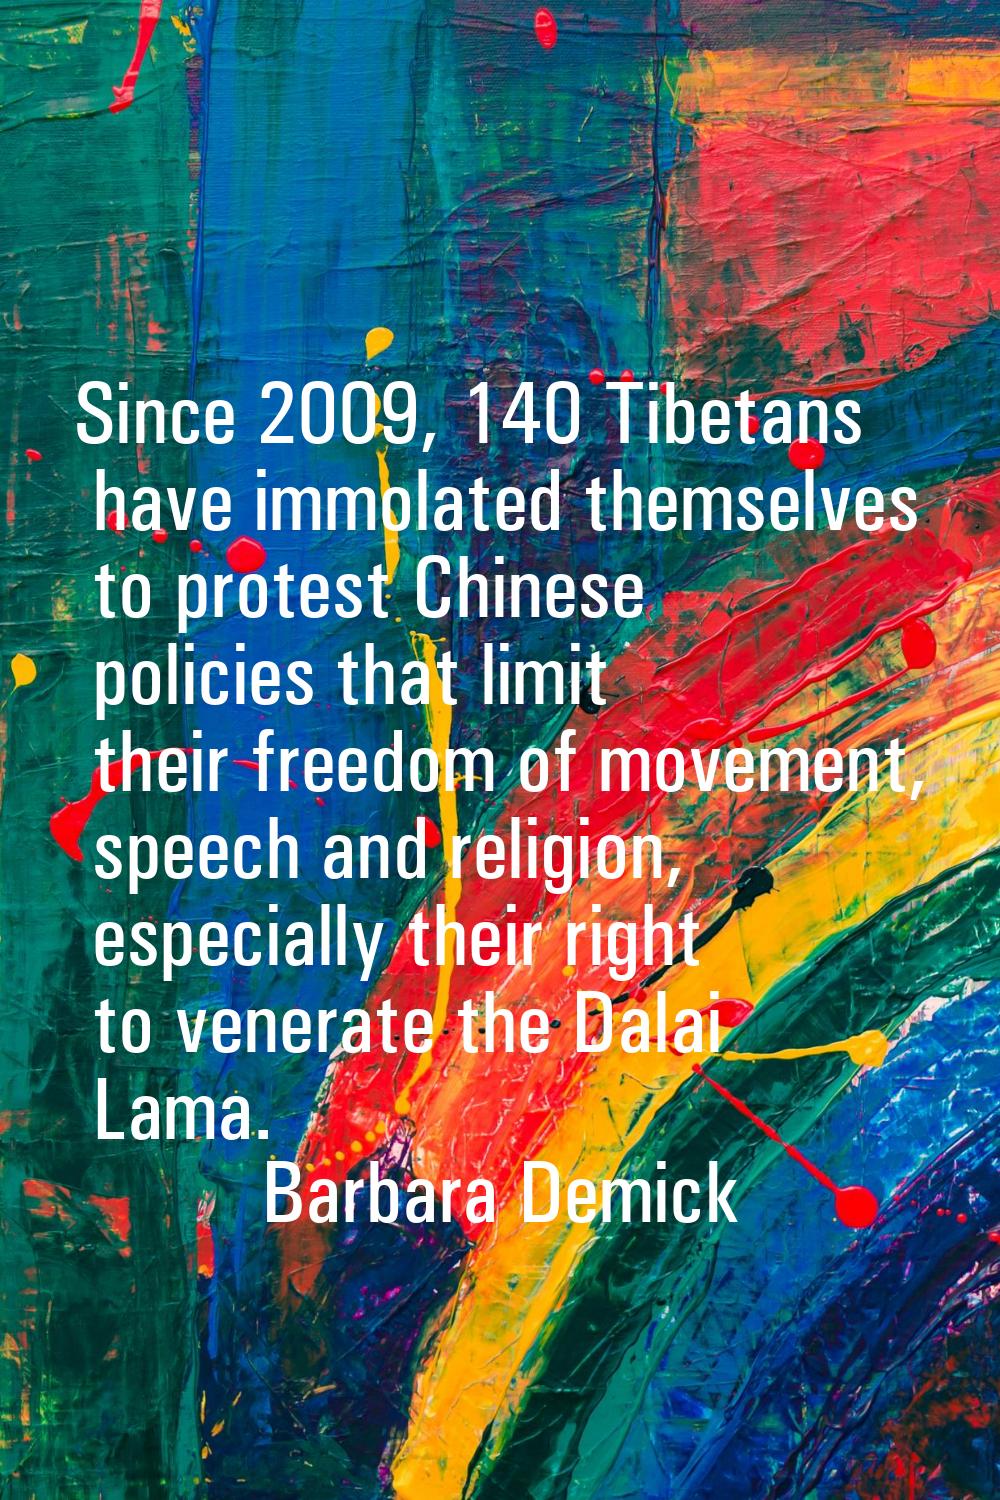 Since 2009, 140 Tibetans have immolated themselves to protest Chinese policies that limit their fre